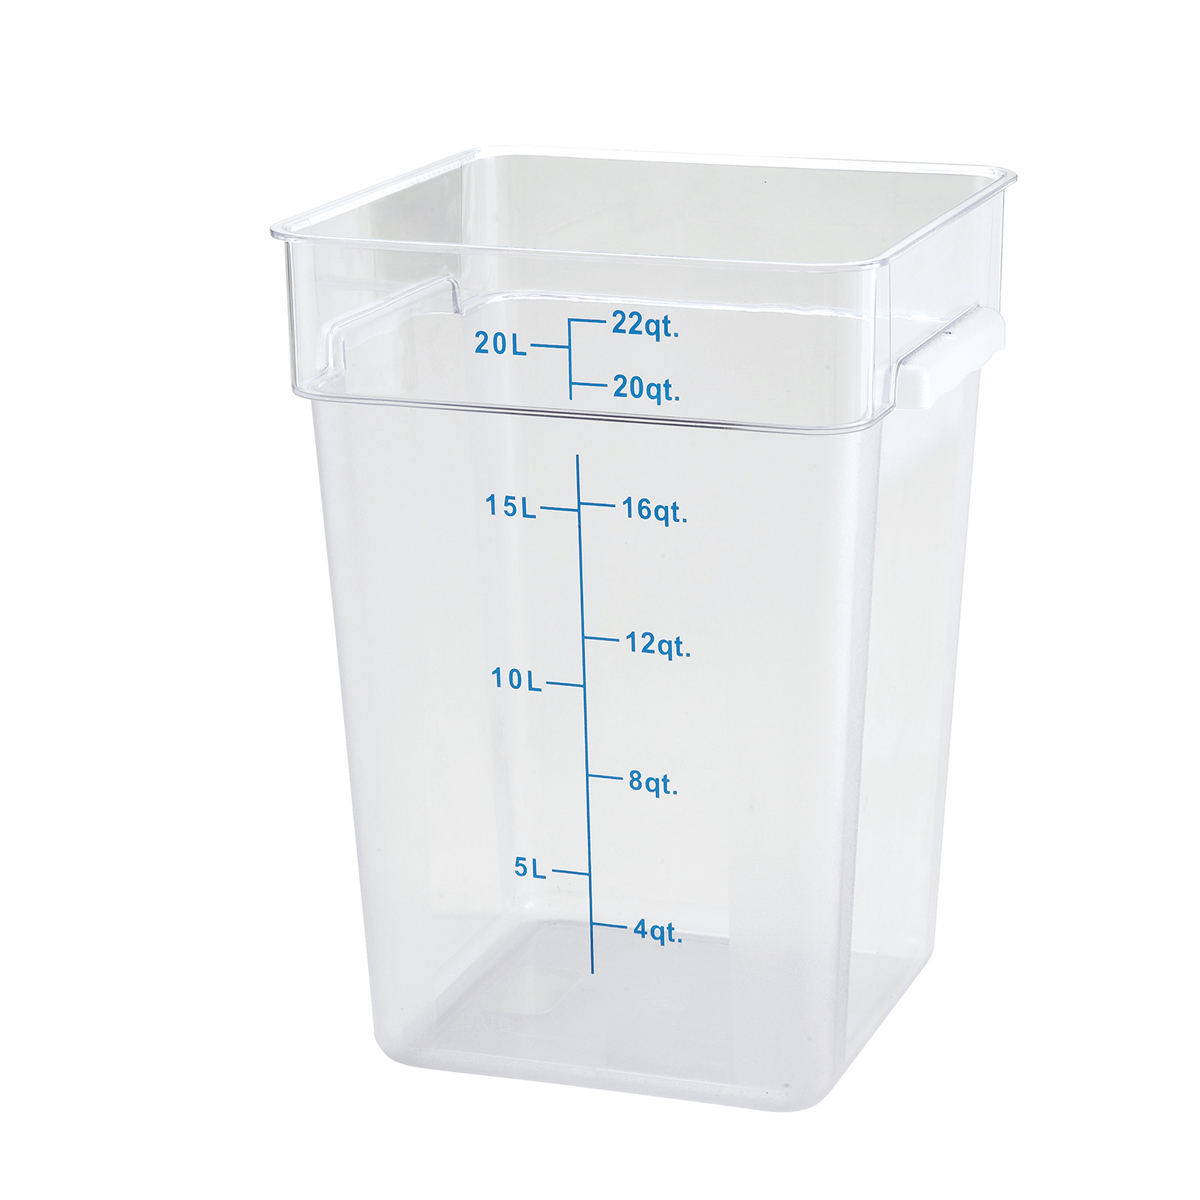 Winware by Winco PCSC-22C Square Food Storage Container, 22 qt., 11-1/8" x 12-5/8" x 15-3/4"H